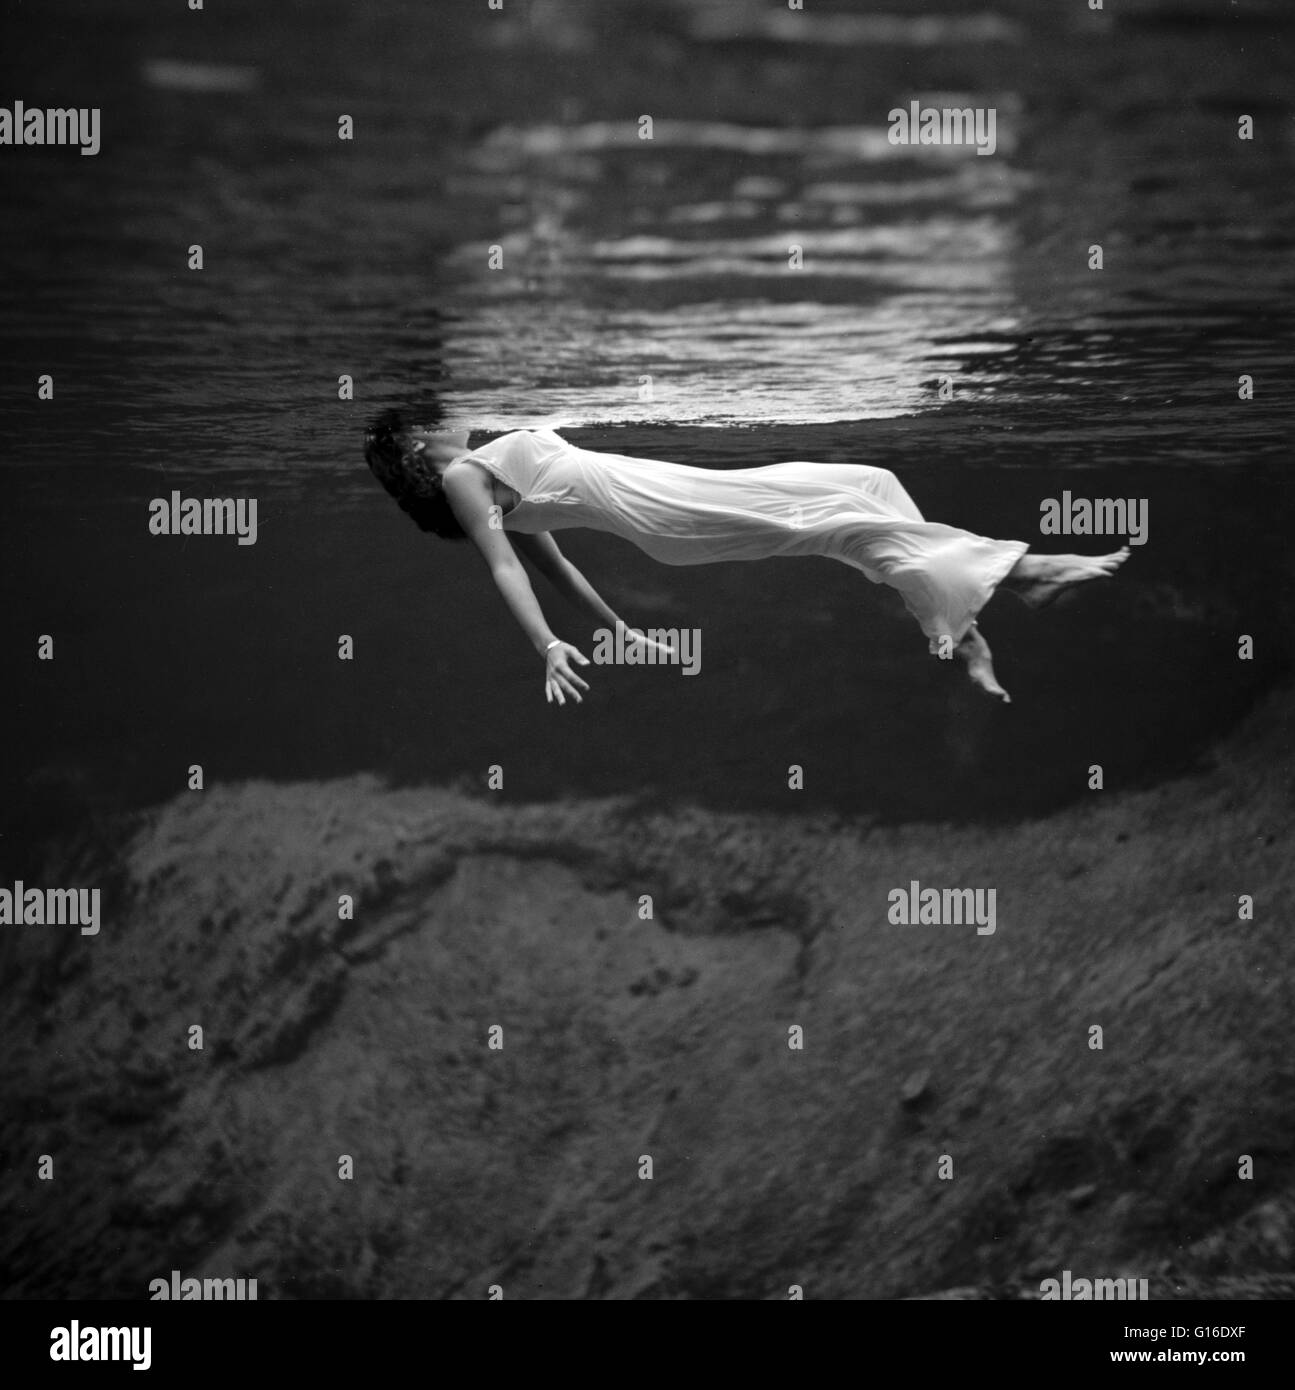 Underwater view of a woman, wearing a long gown, floating in water. Photographed at Weeki Wachee Spring, Florida, 1947. Fashion photography is a genre of photography devoted to displaying clothing and other fashion items. Fashion photography is most often Stock Photo